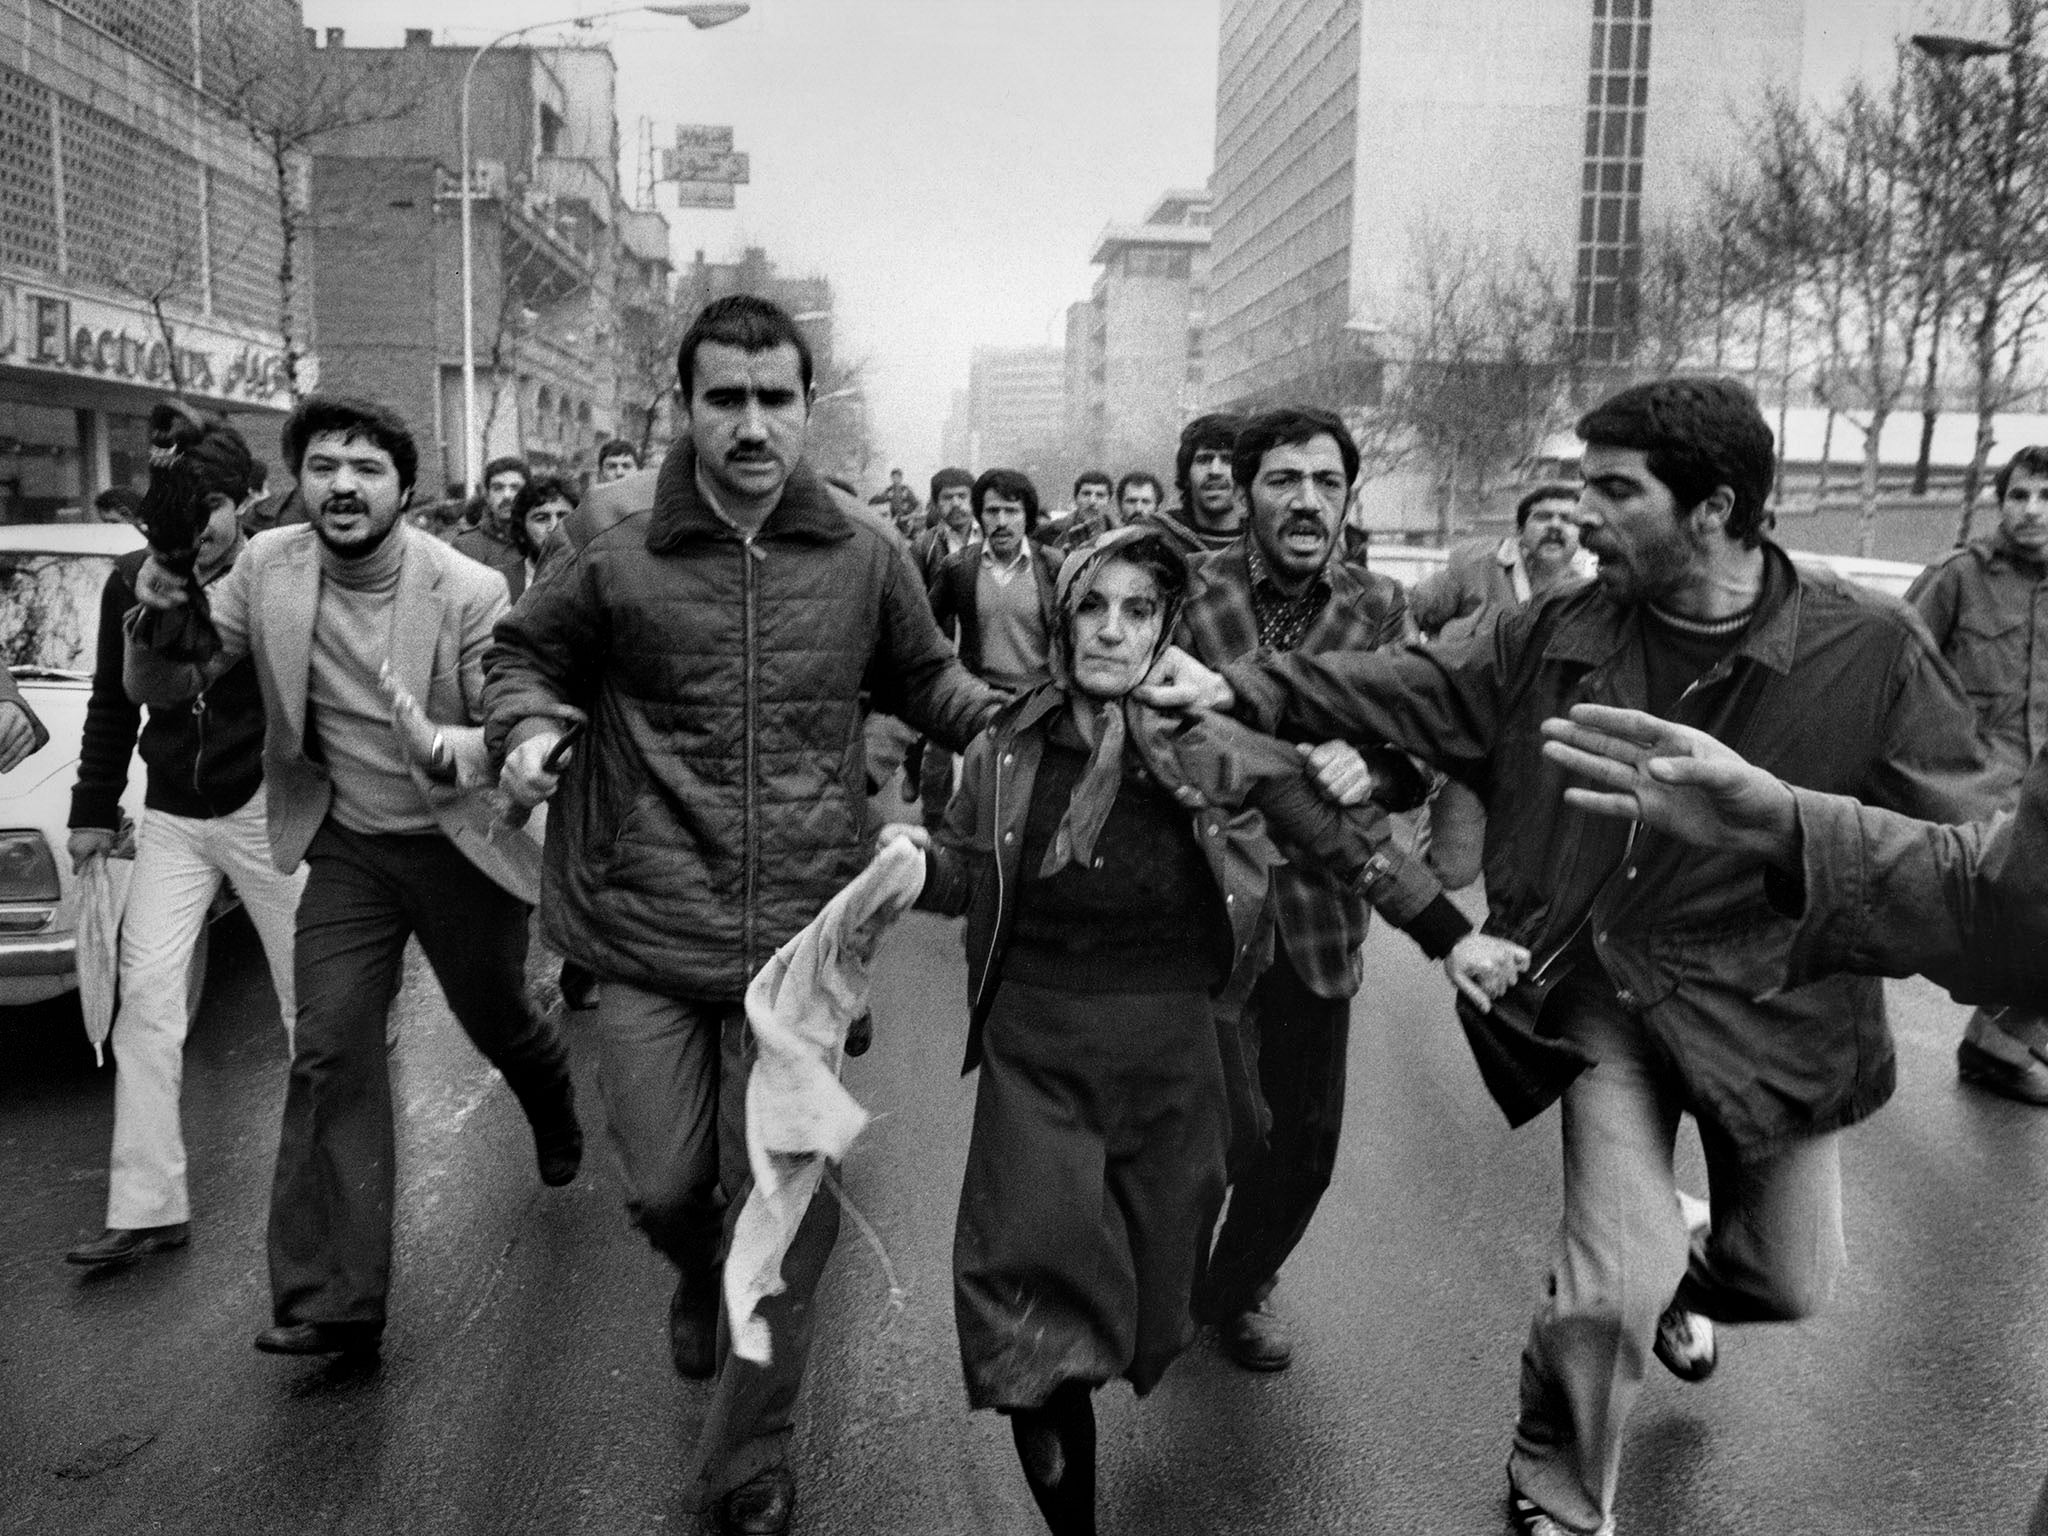 Abbas: Magnum photographer who chronicled religions, wars and the Iranian revolution | The Independent